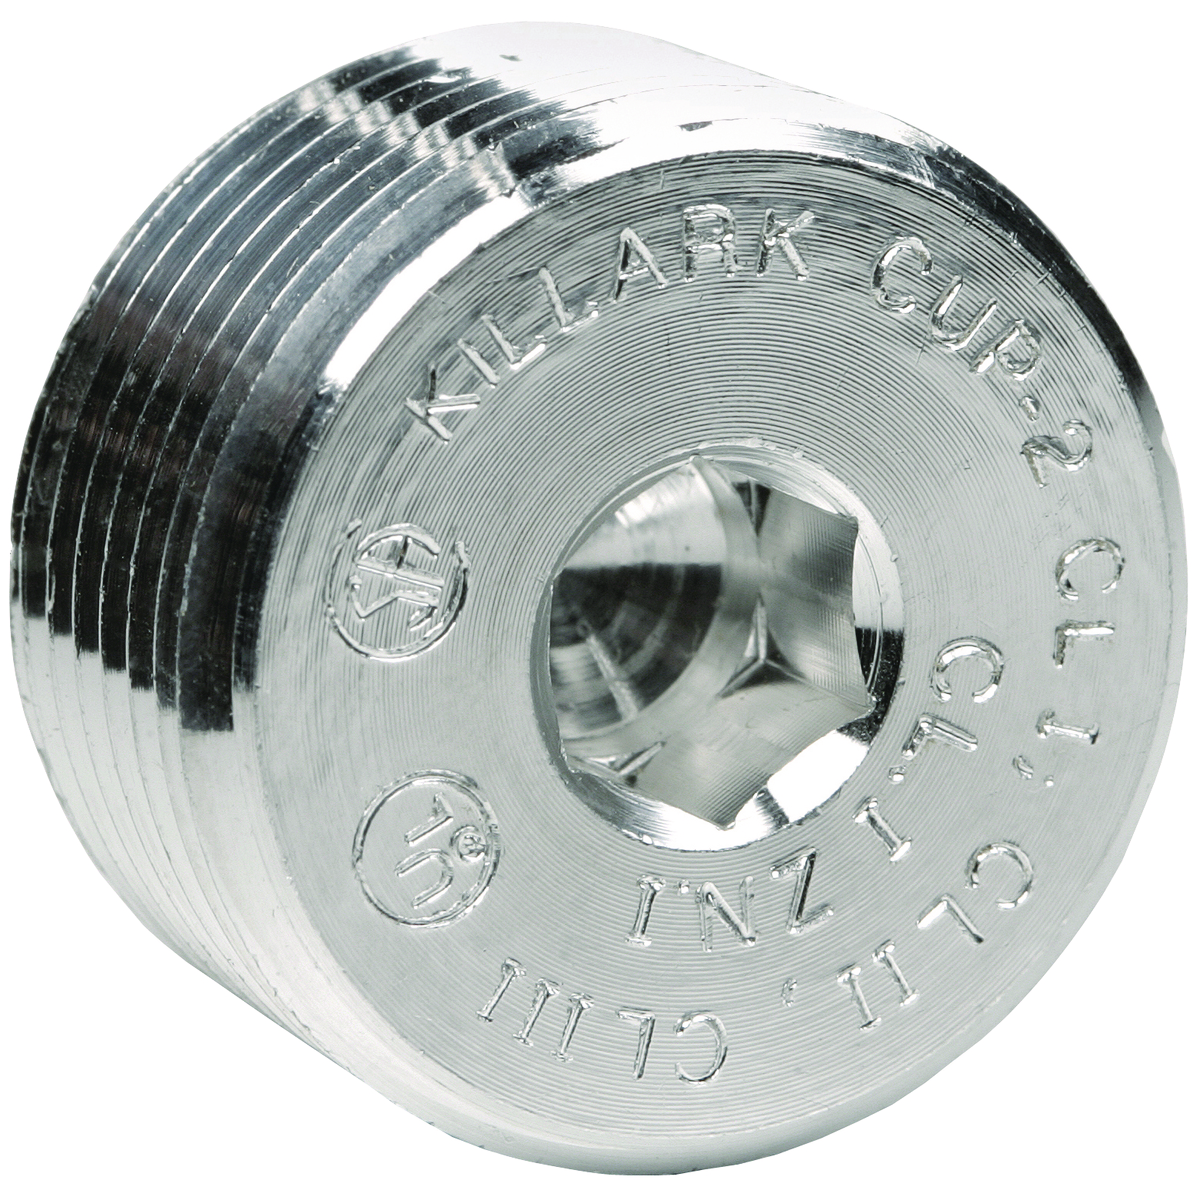 CUP SERIES FITTINGS - ALUMINUM - RECESSED PLUG - HUB SIZE 3/4 IN